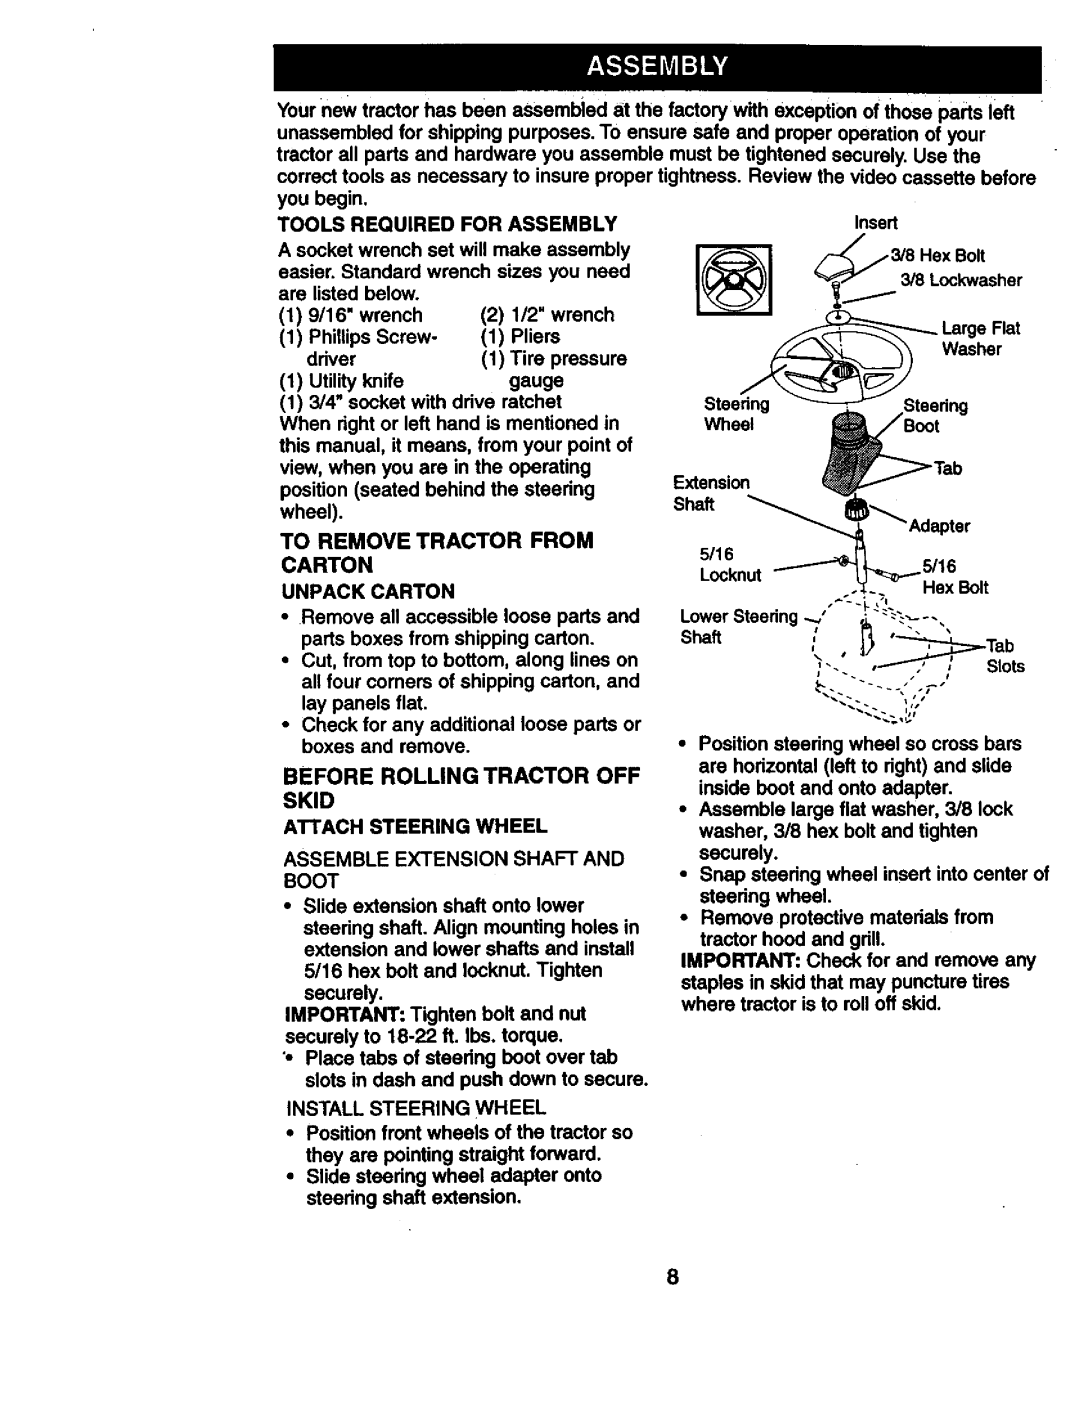 Craftsman 917.270814 owner manual Before Rolling Tractor Off Skid 